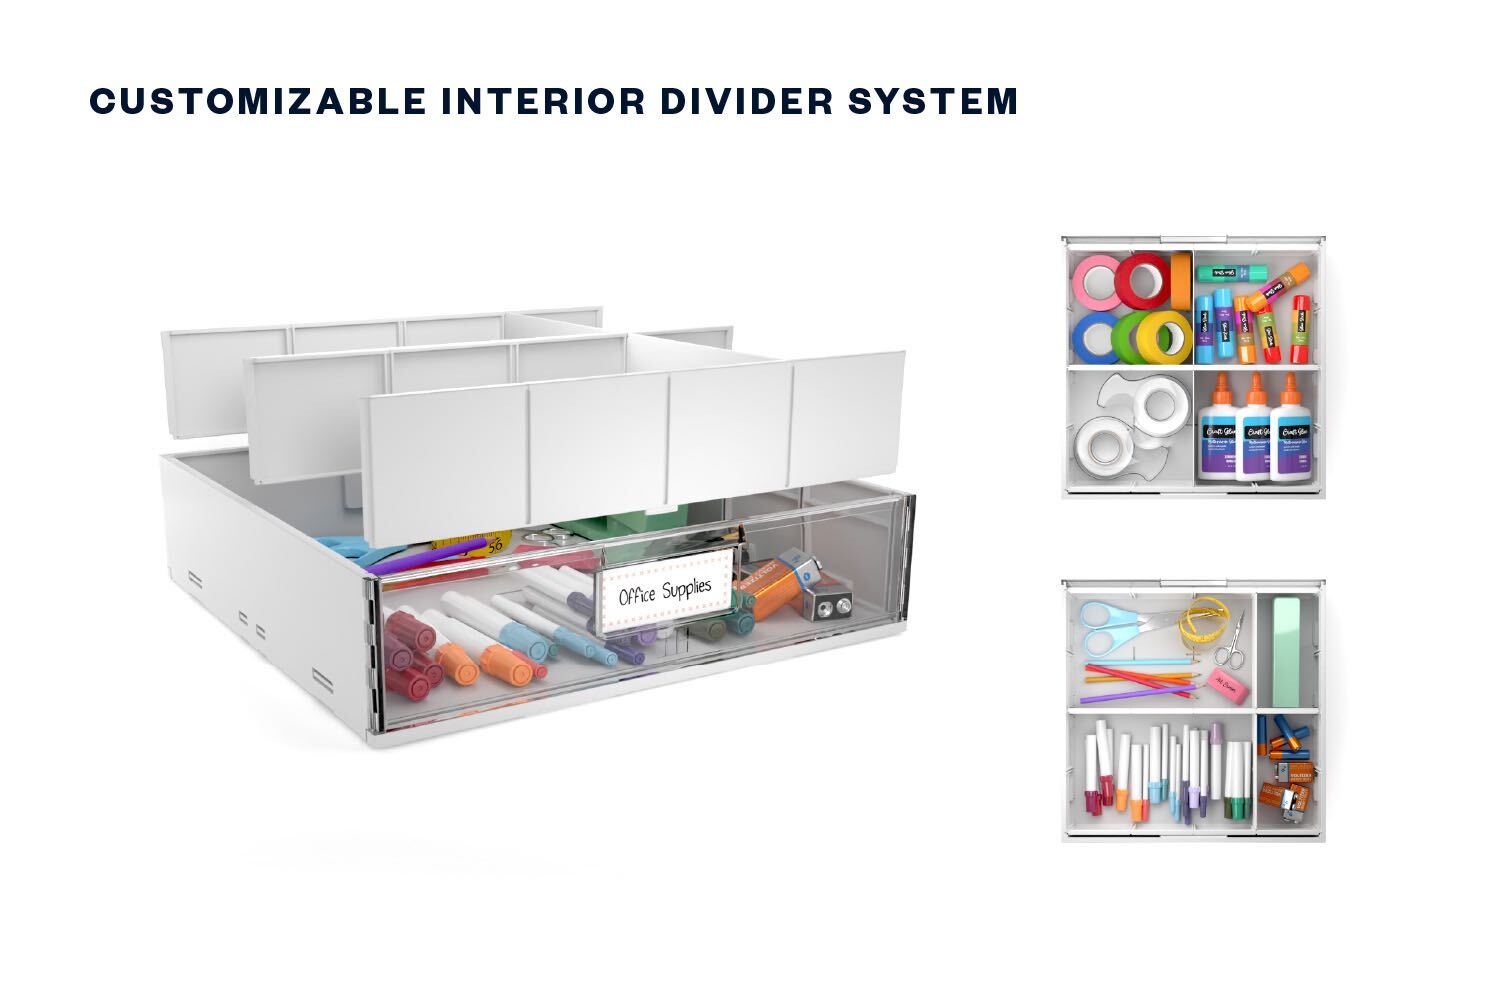 Graphic illustrating the flexible divider options of the new Create Room DiviDrawers